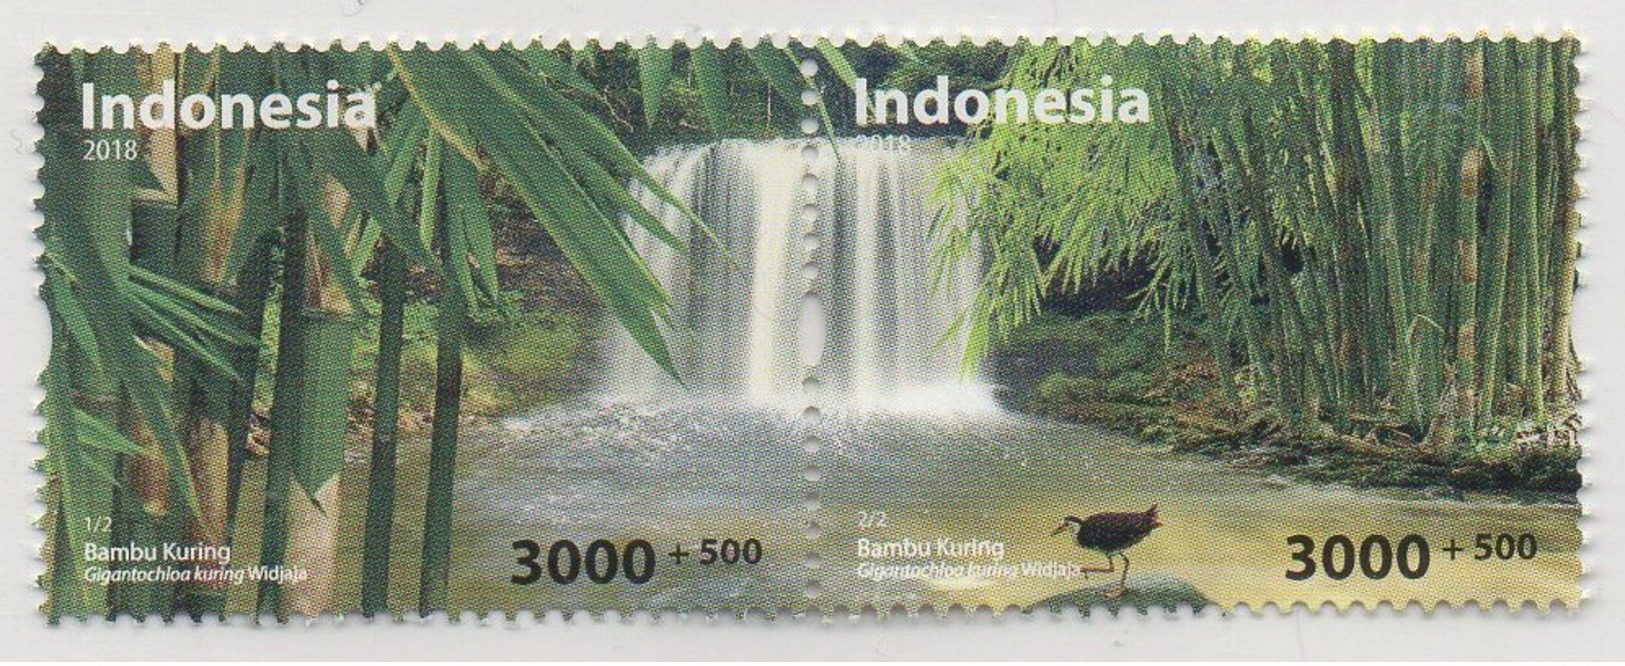 INDONESIA 2018--4 ENVIRONMENT CARE WATERFALL BAMBOO BIRD SET STAMPS MNH - Indonesia